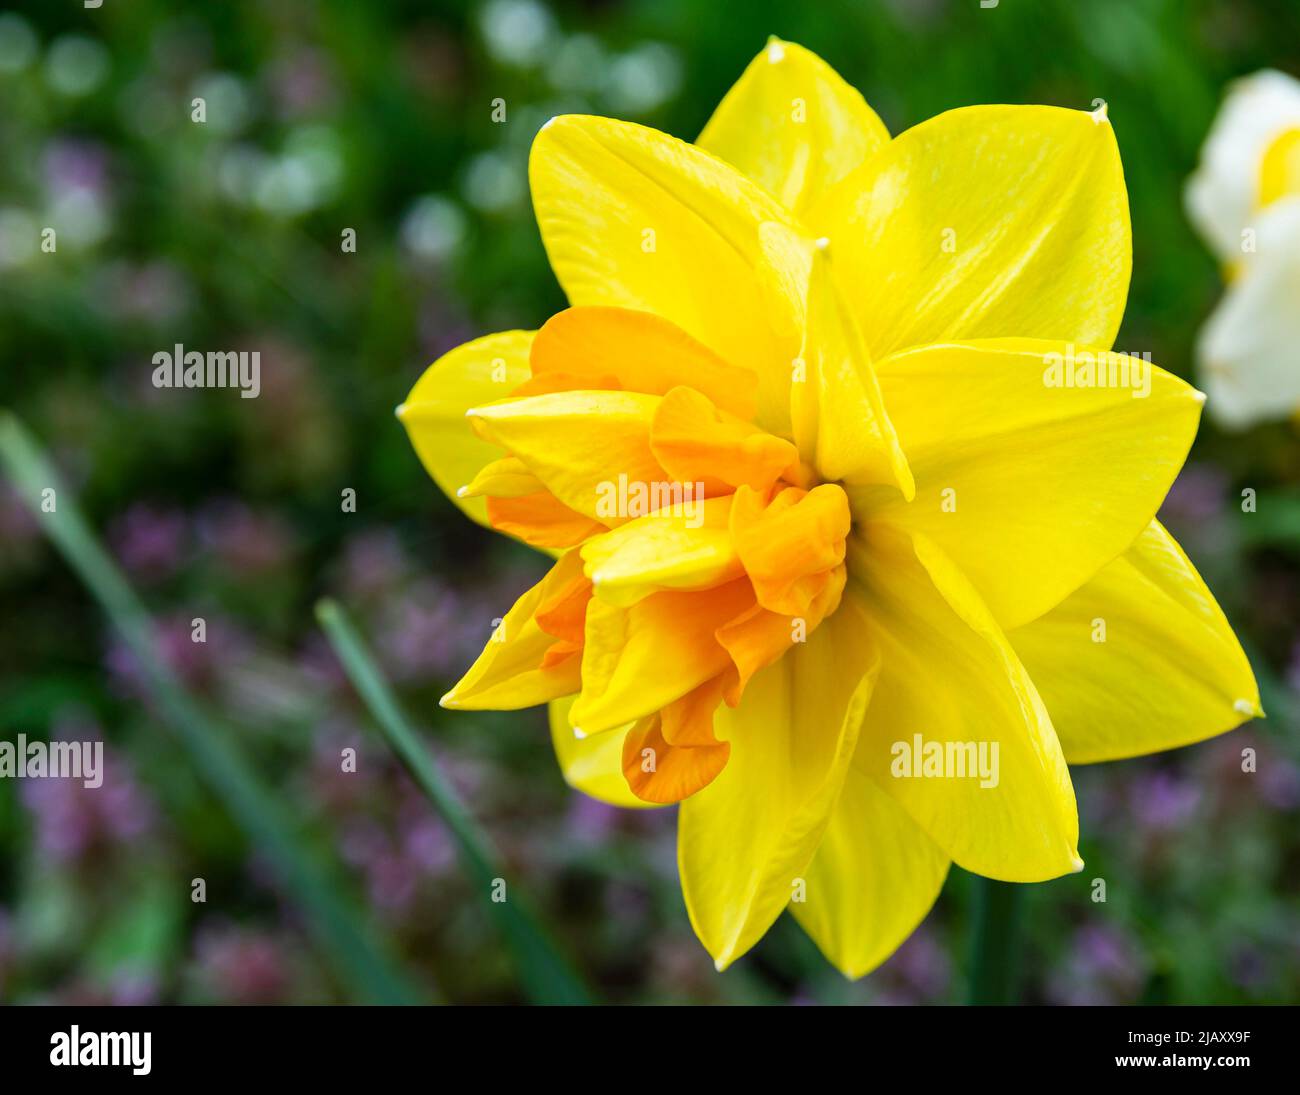 Flower decorative two-tone Narcissus (Latin Narcissus) Stock Photo